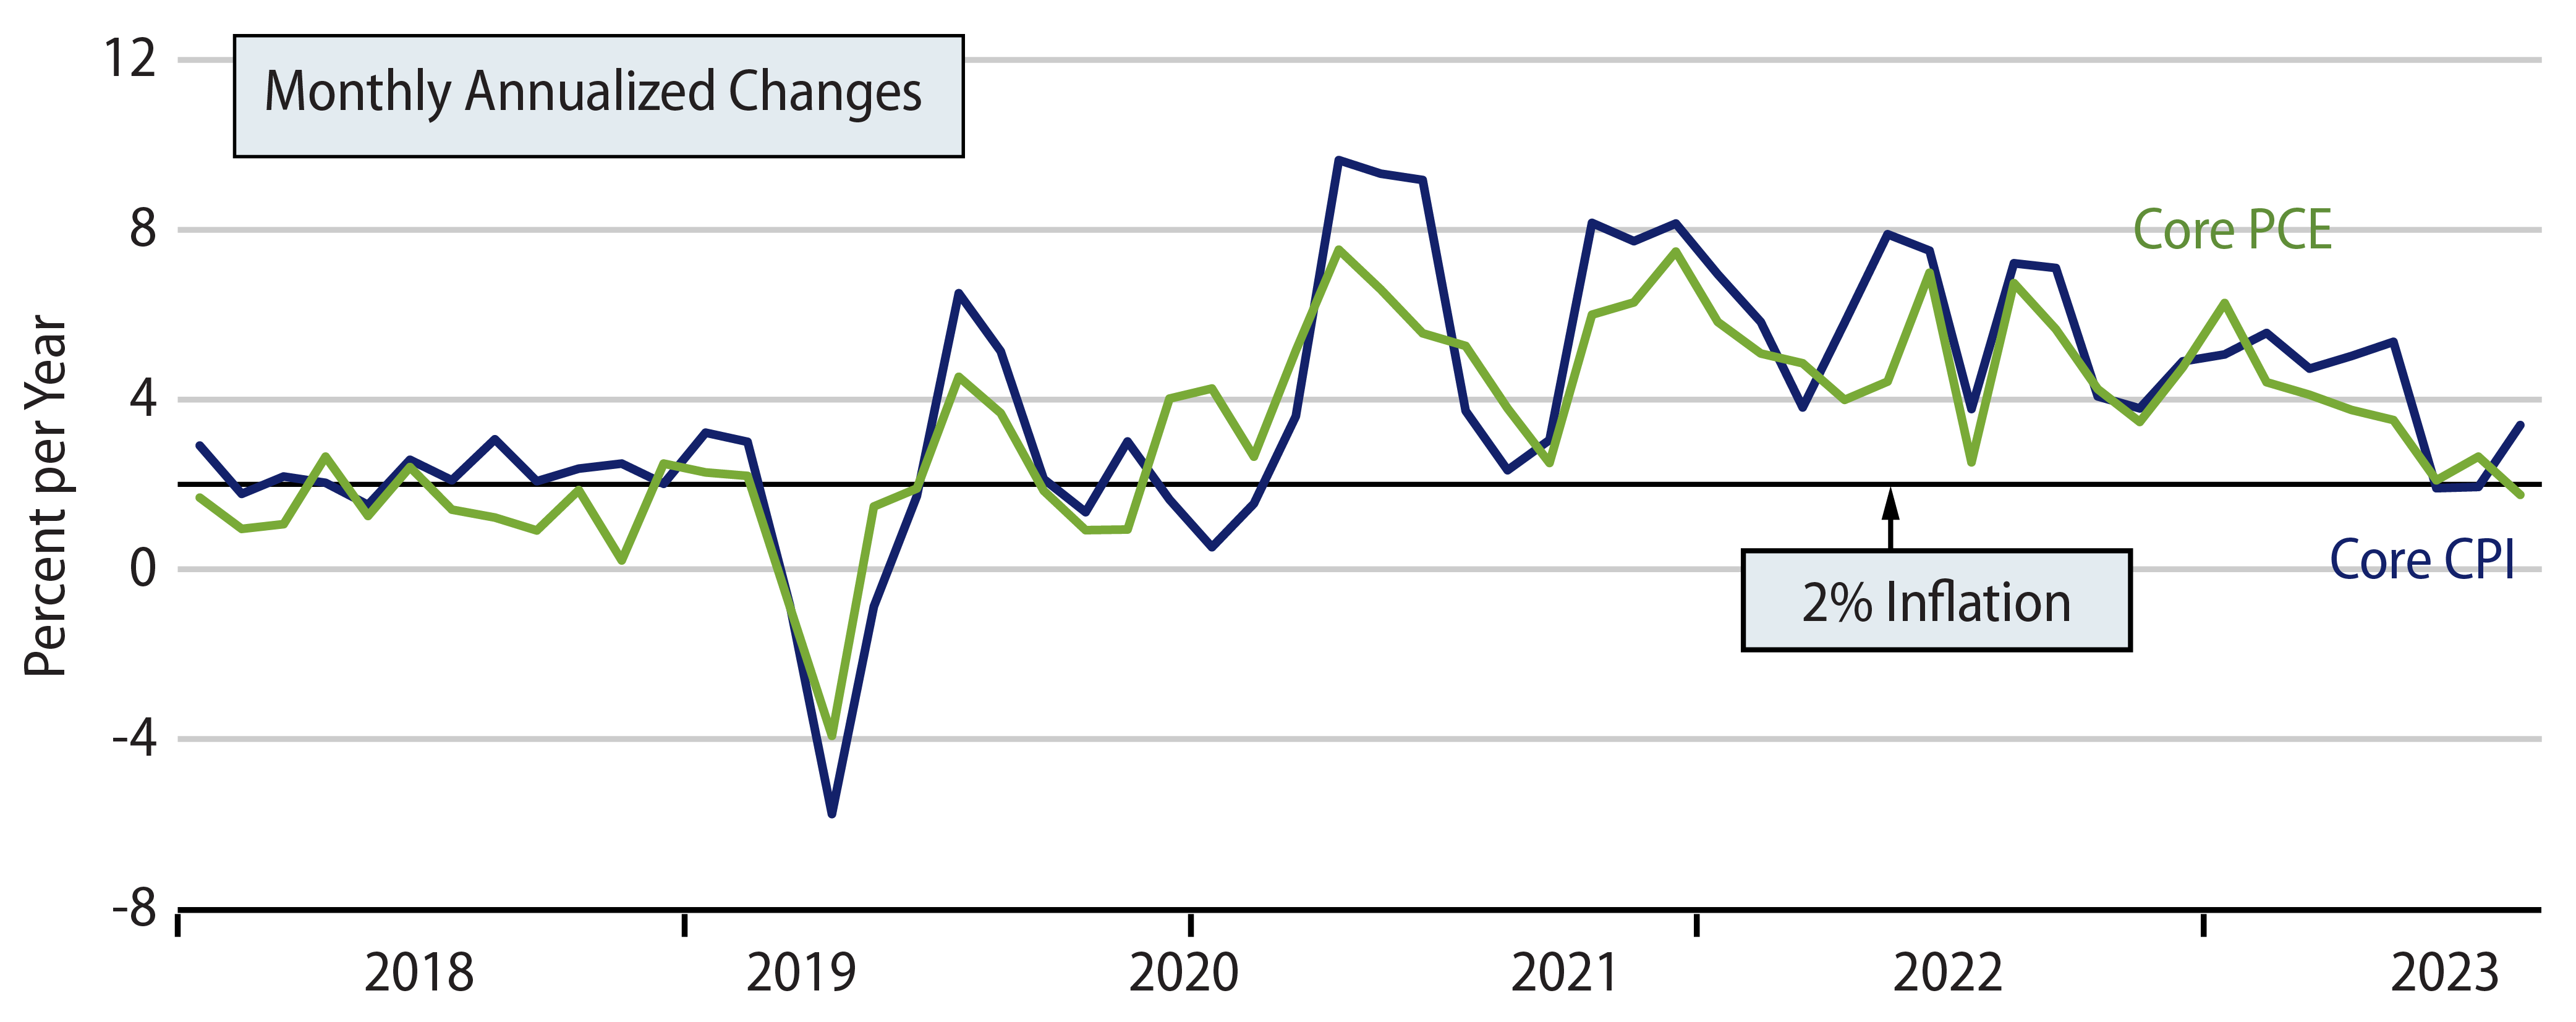 Core Inflation: CPI and PCE